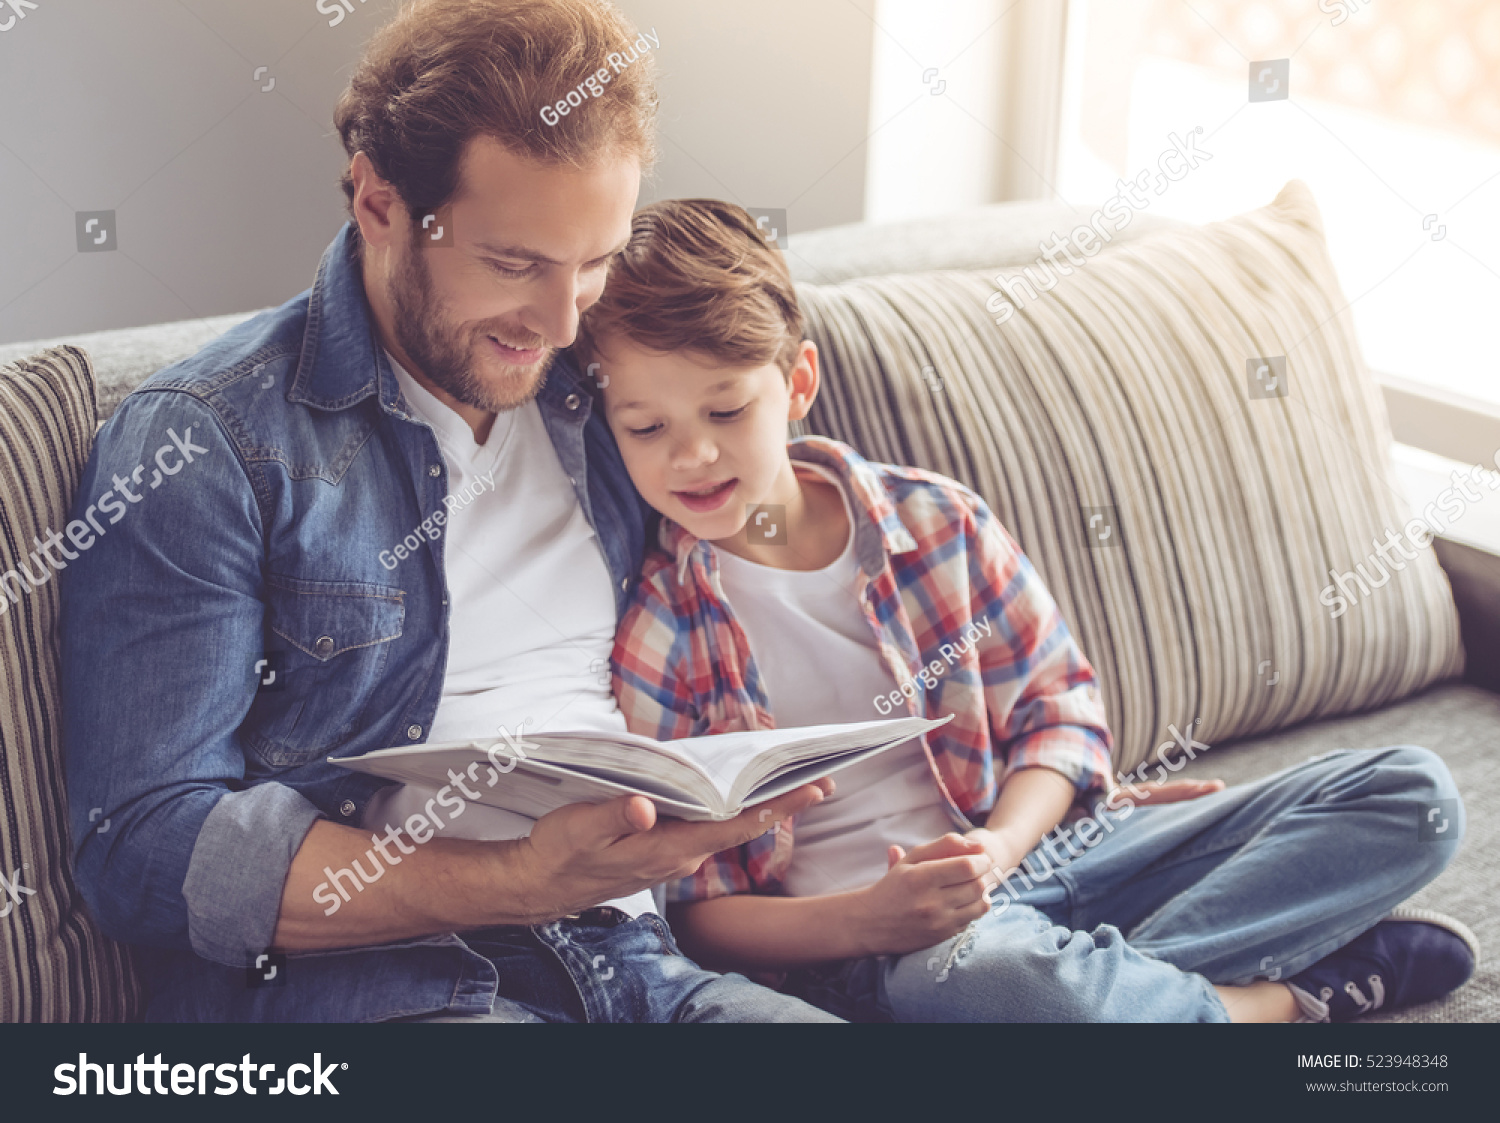 Father and son are reading a book and smiling while spending time together at home #523948348